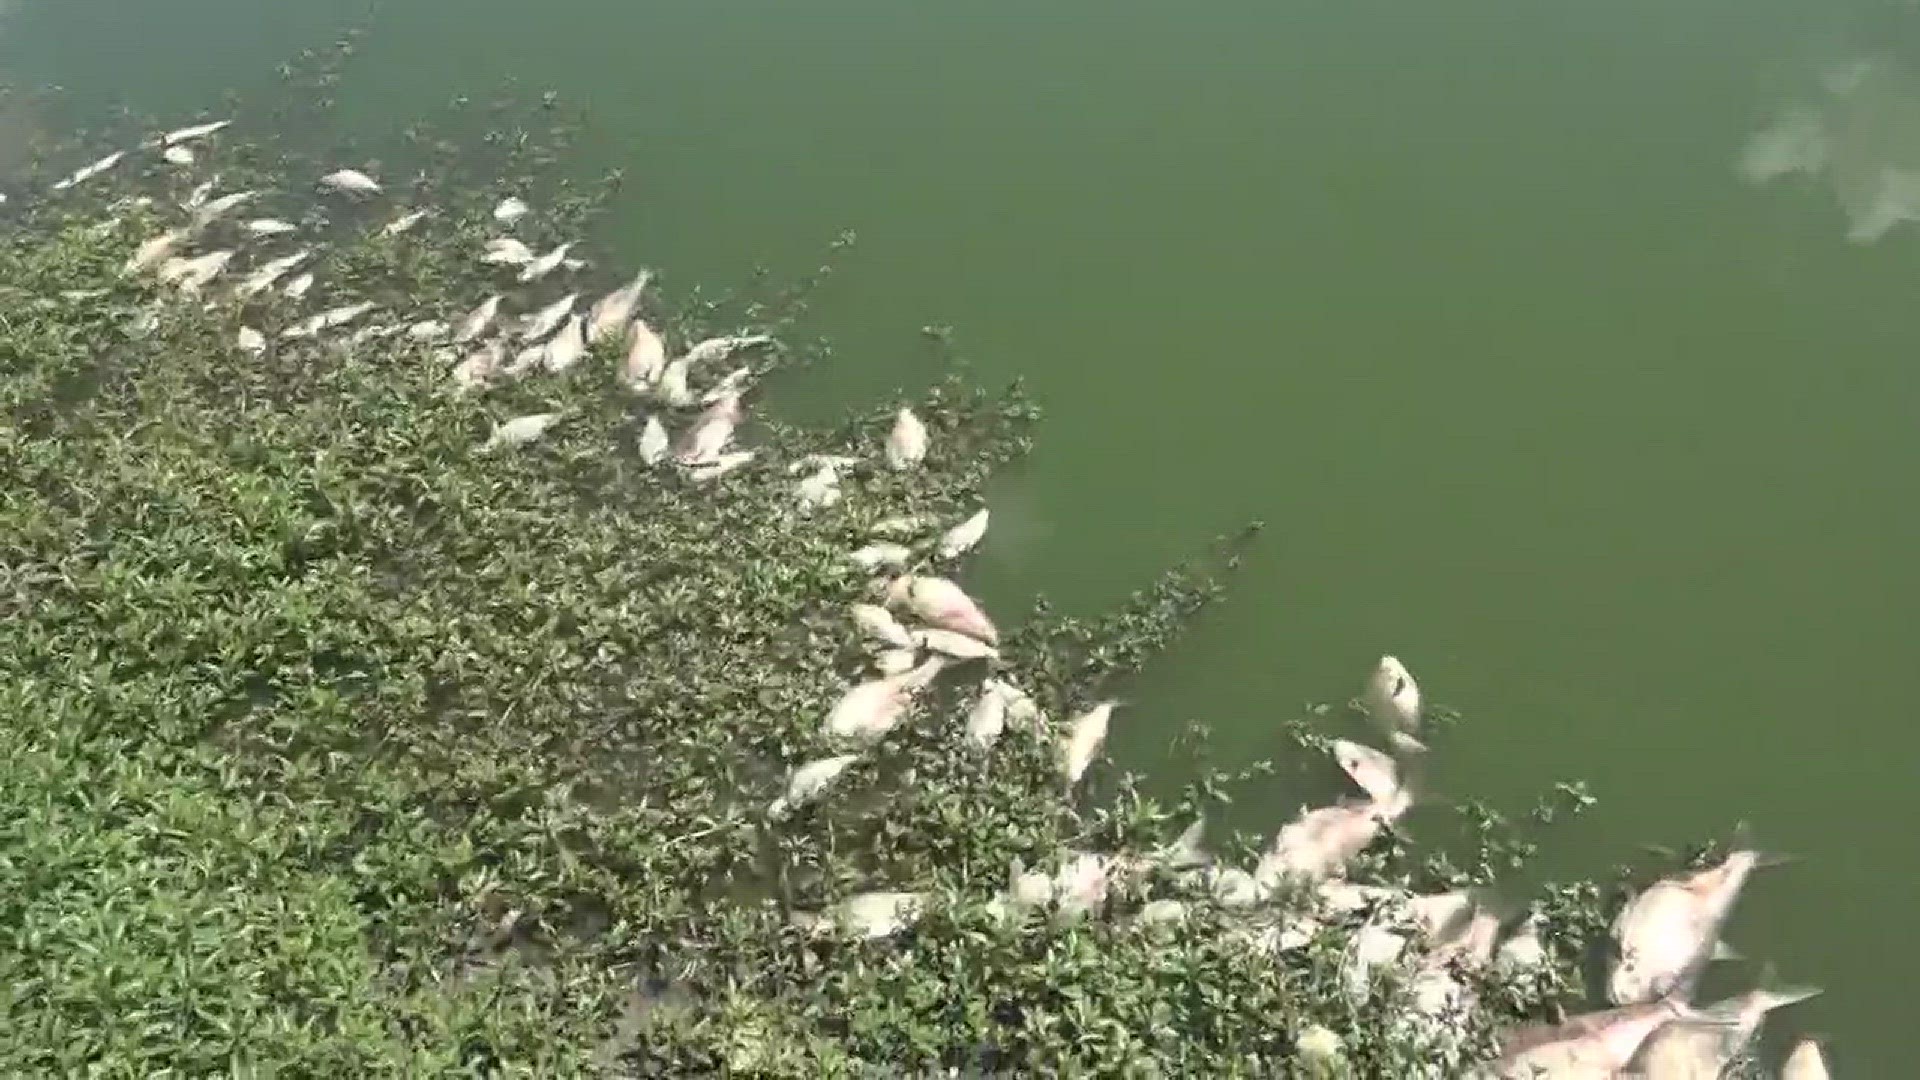 Imagine the smell of dead fish permeating your neighborhood.